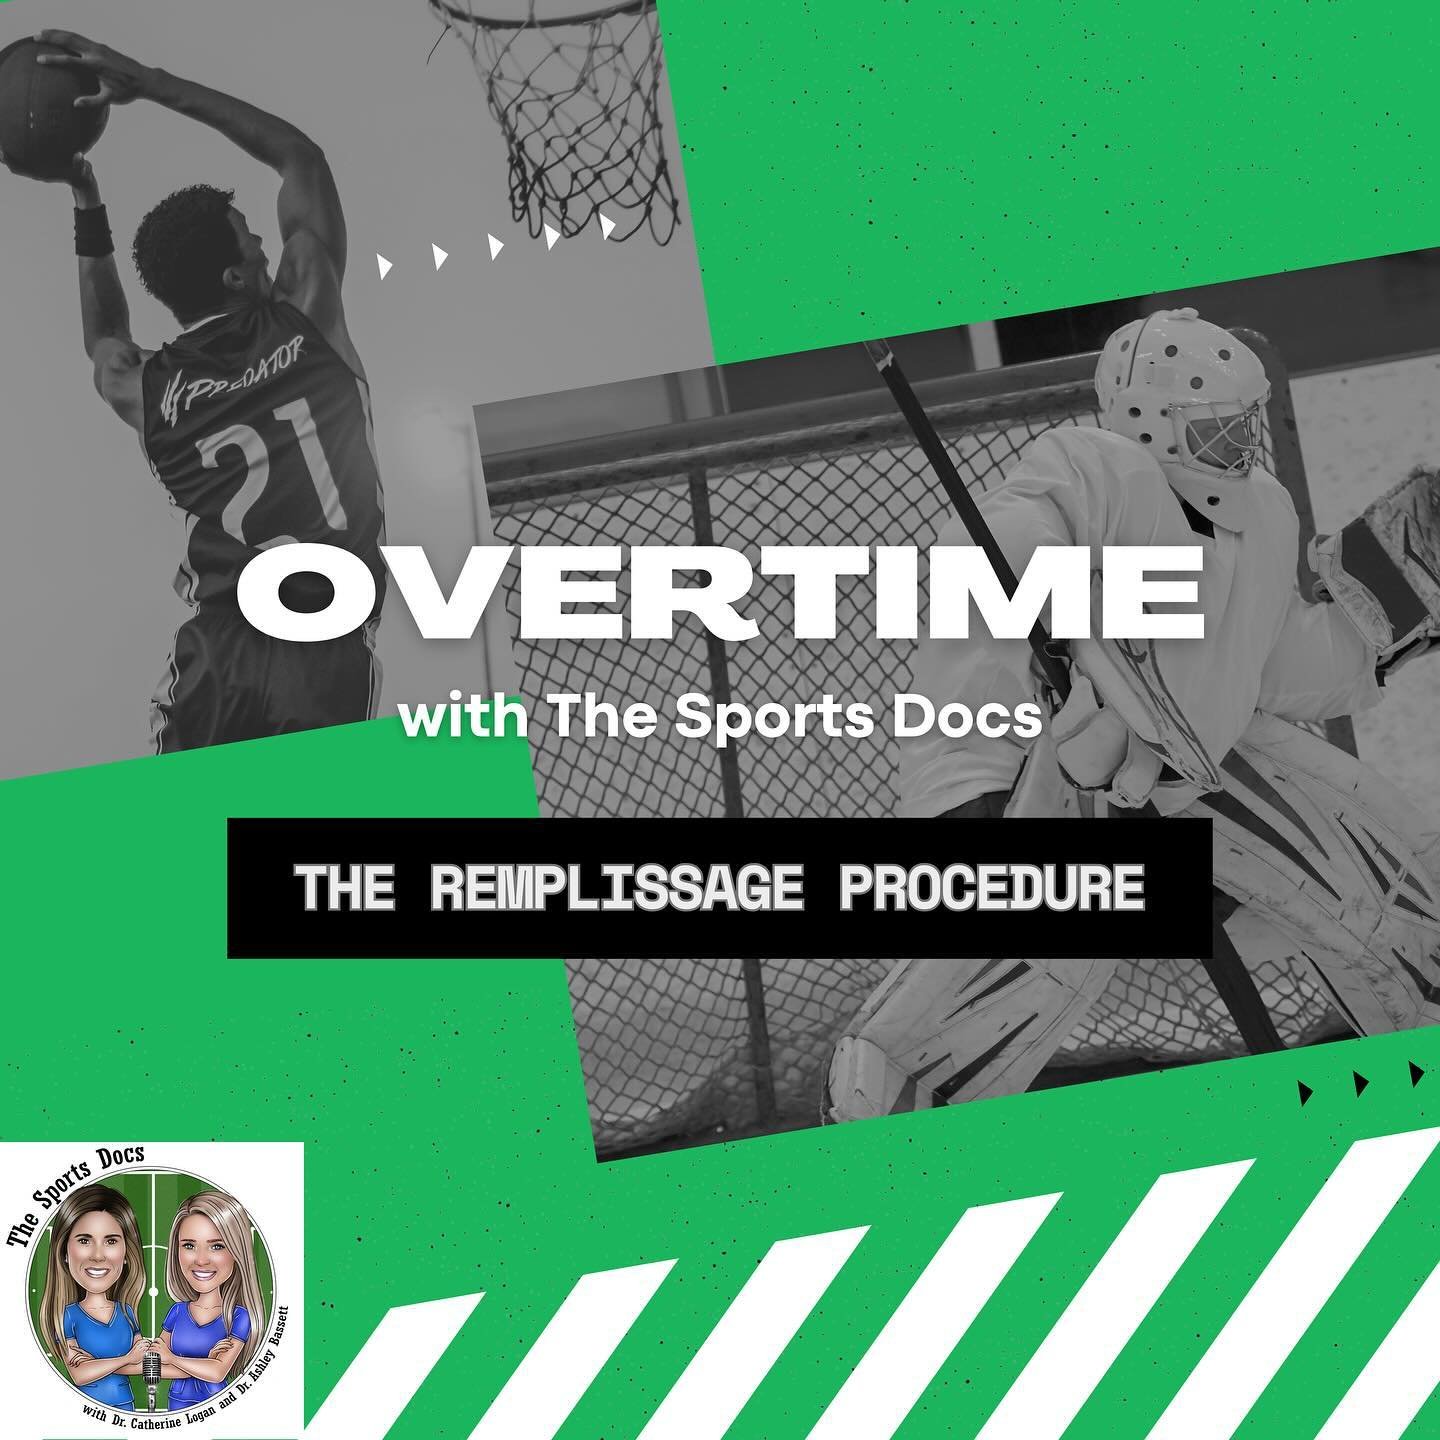 ✨ NEW episode is LIVE! ✨

On this #overtime episode, we&rsquo;re talking about the remplissage procedure! We&rsquo;ve referred to the remplissage procedure many times on this show, including Episodes 48 and 49 with @brianlaumd and Episodes 69 and 70 